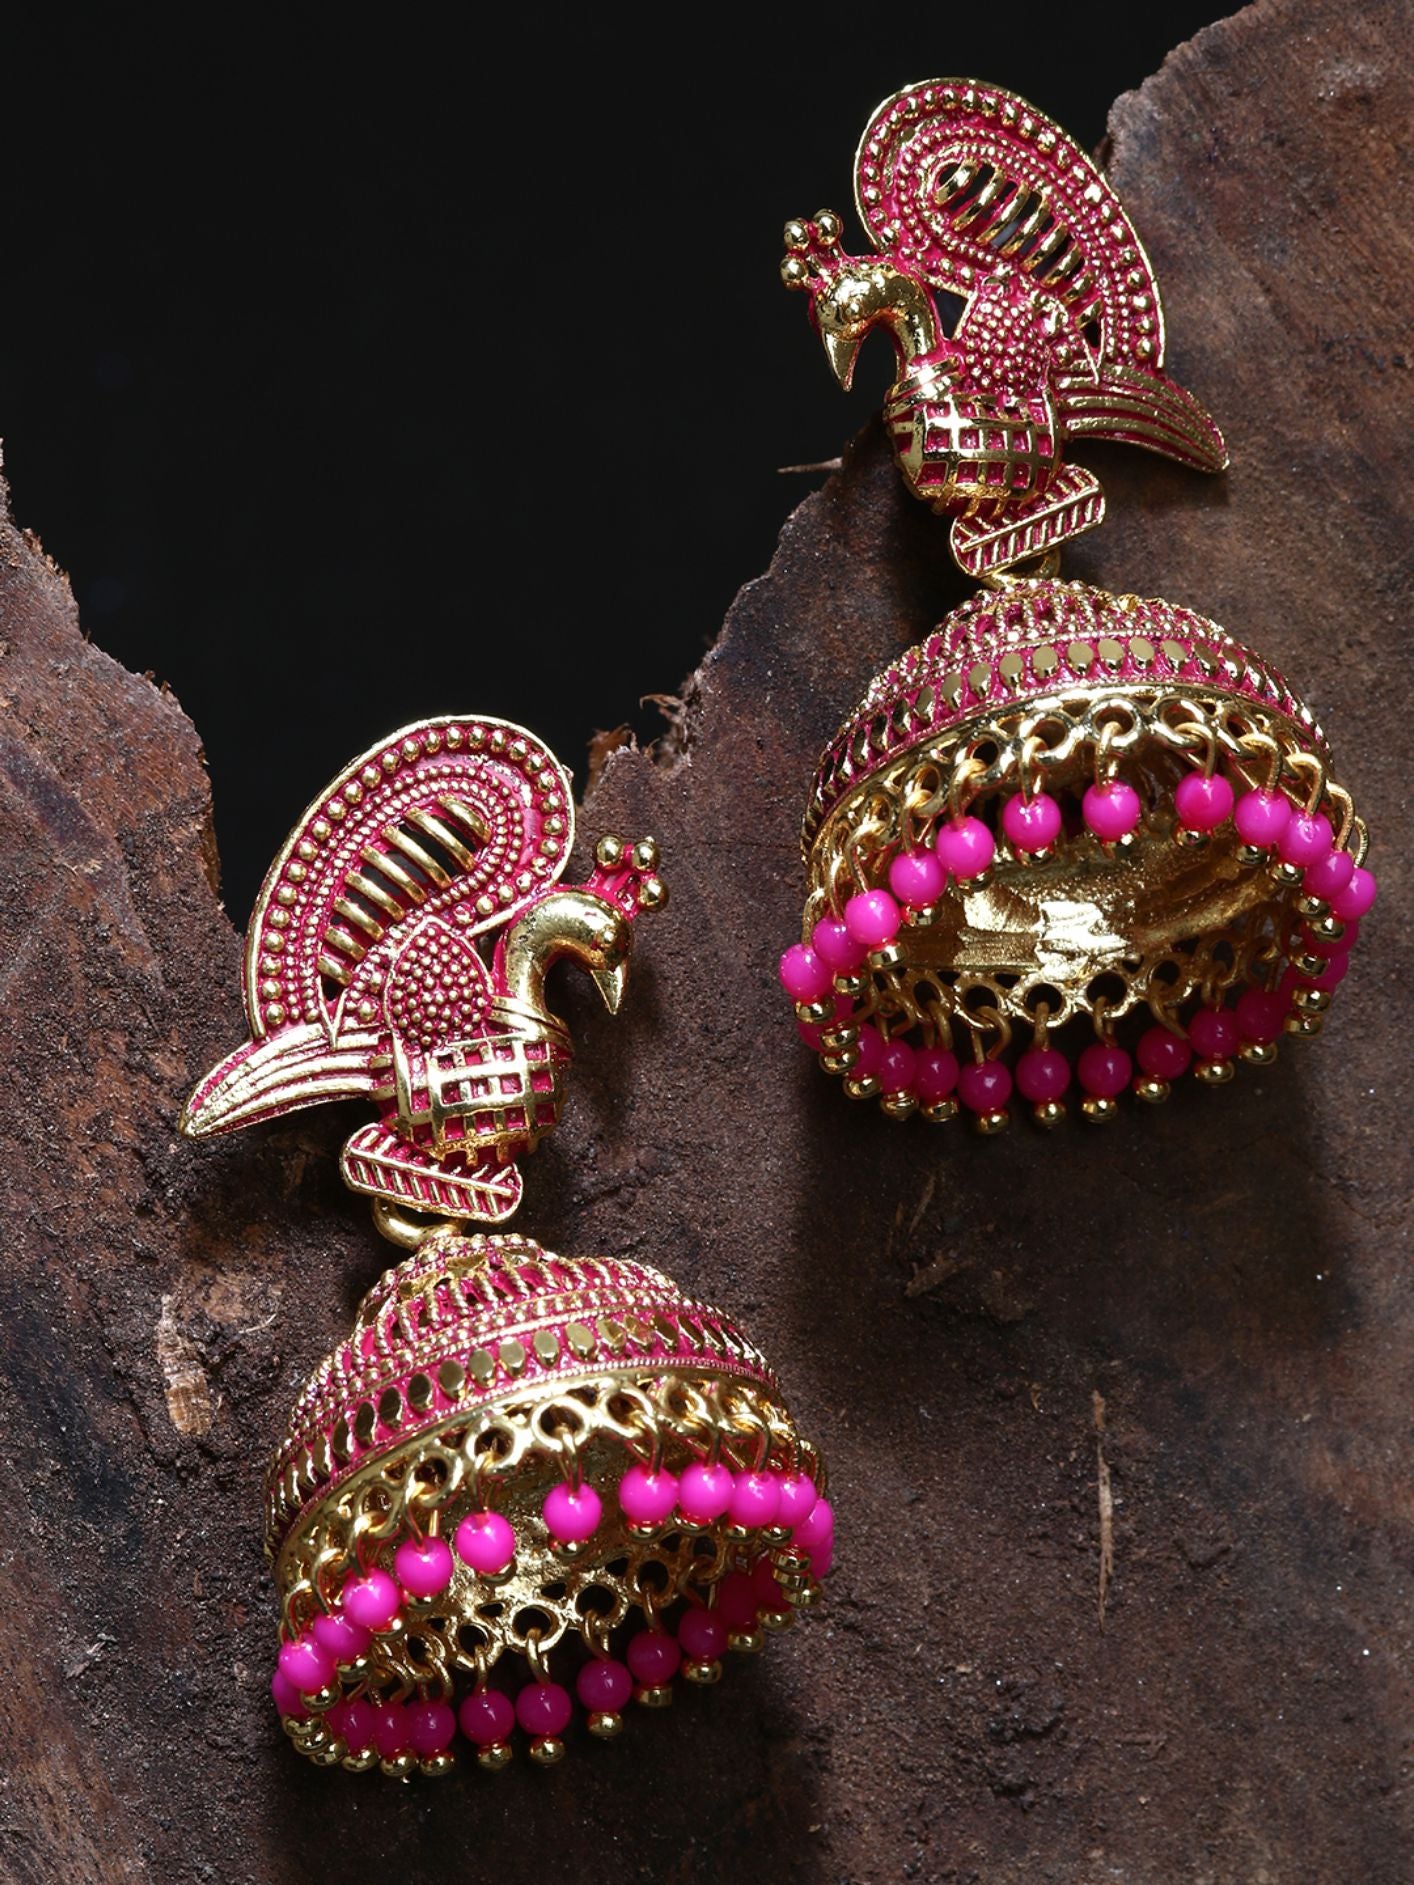 Women's Gold Plated & Pink Enamelled Peacock Shaped Jhumkas - Anikas Creation